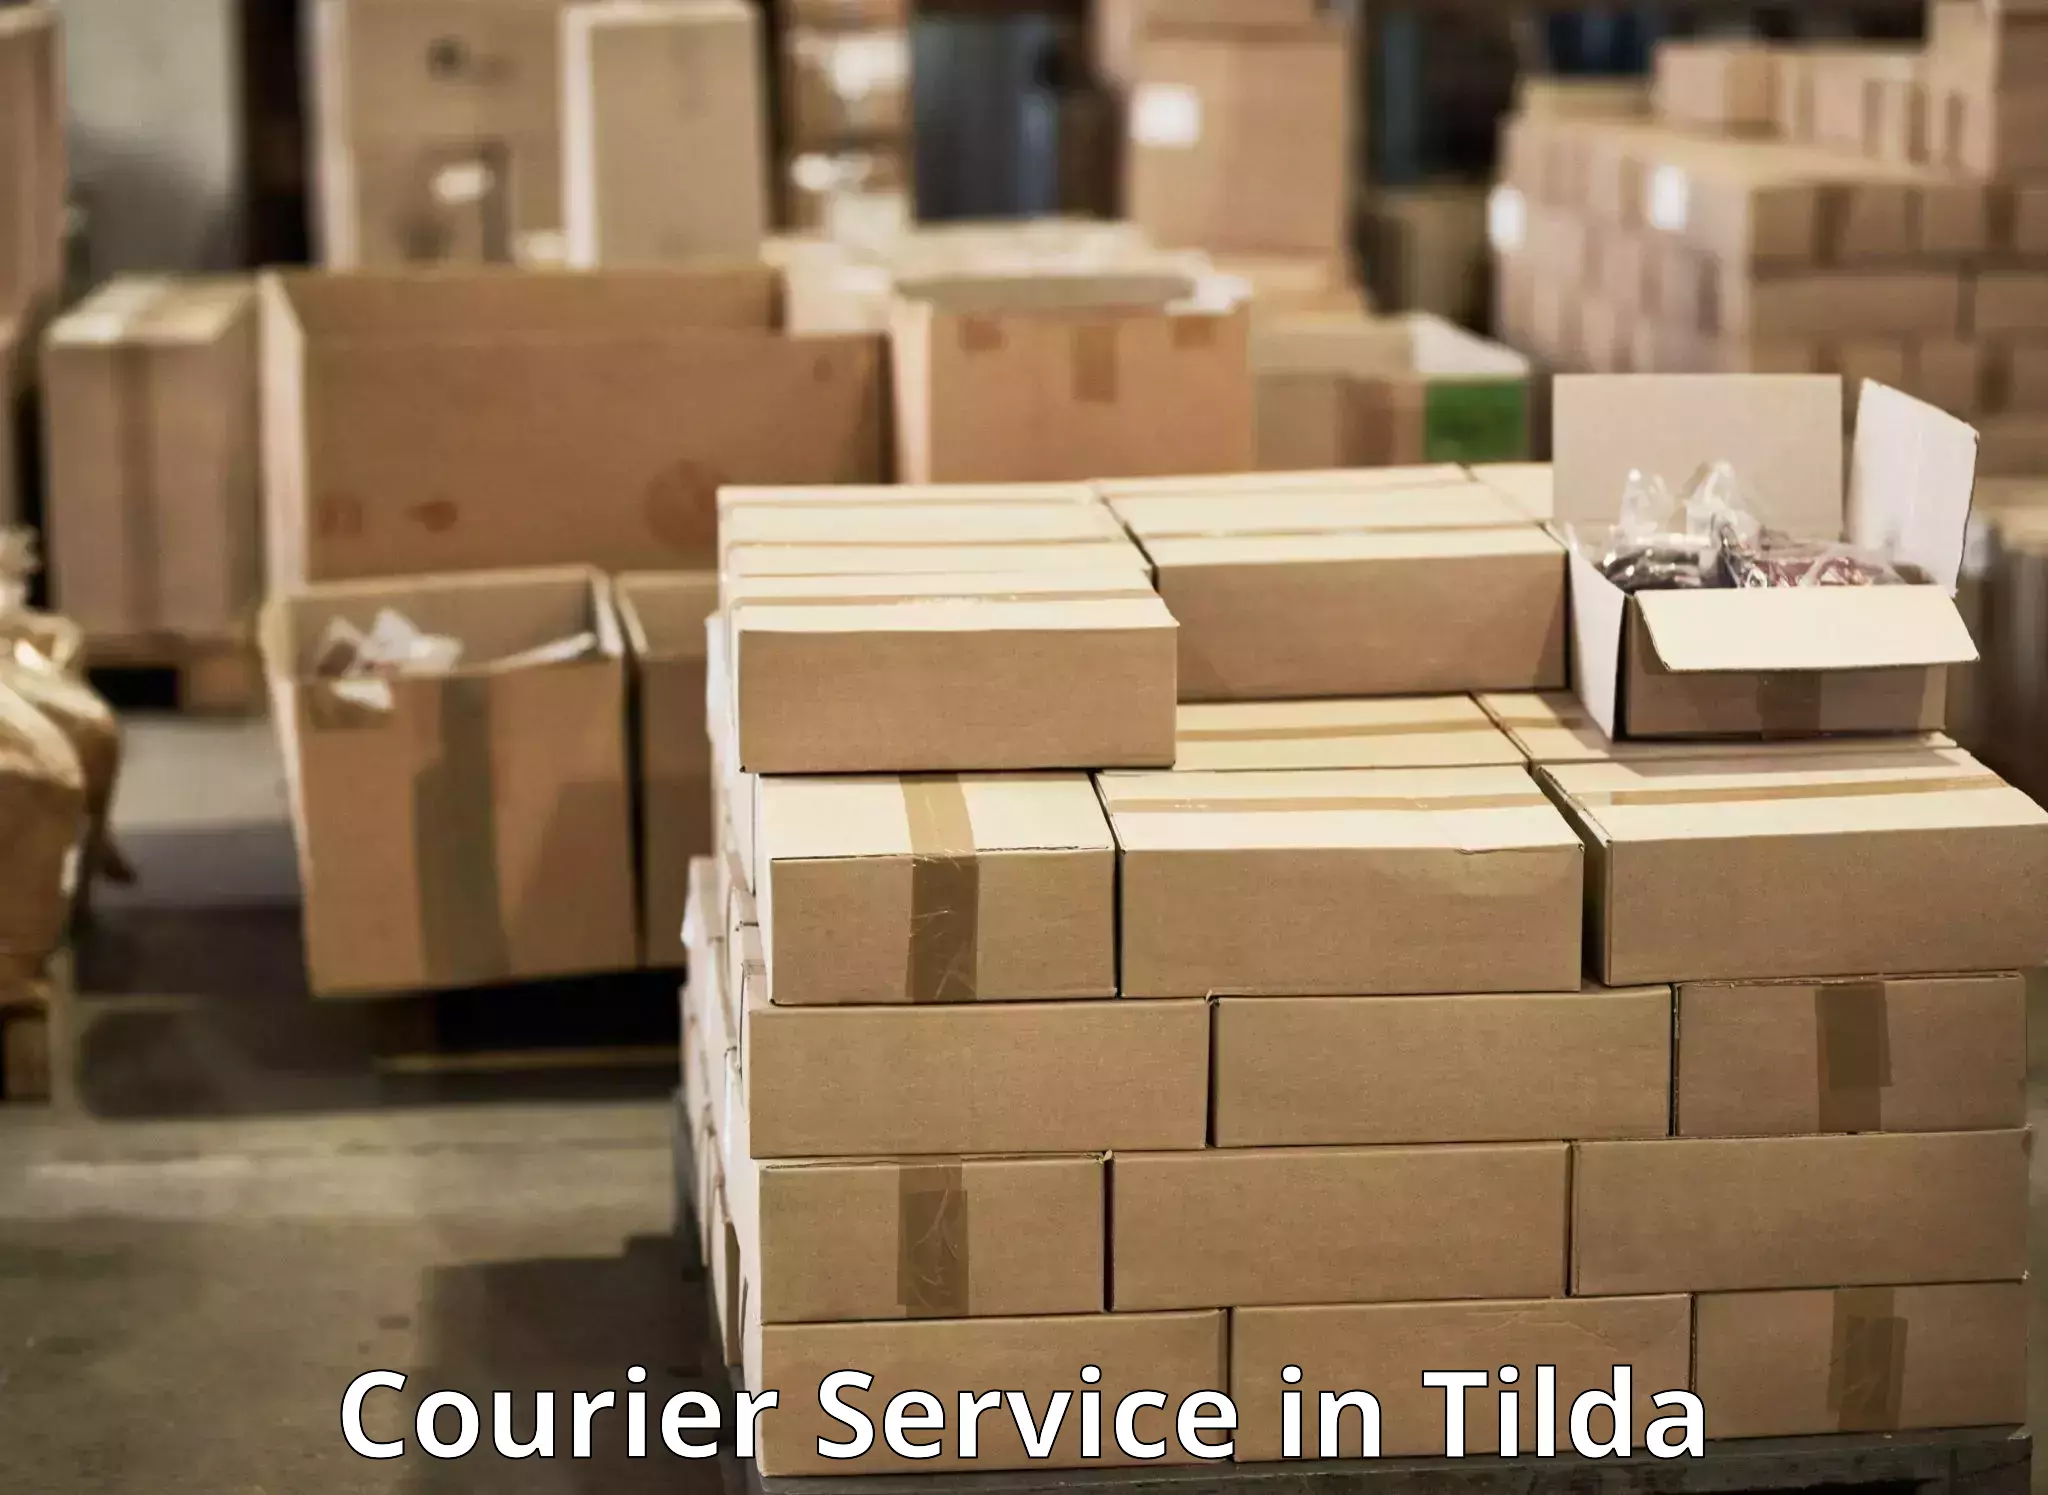 Sustainable shipping practices in Tilda